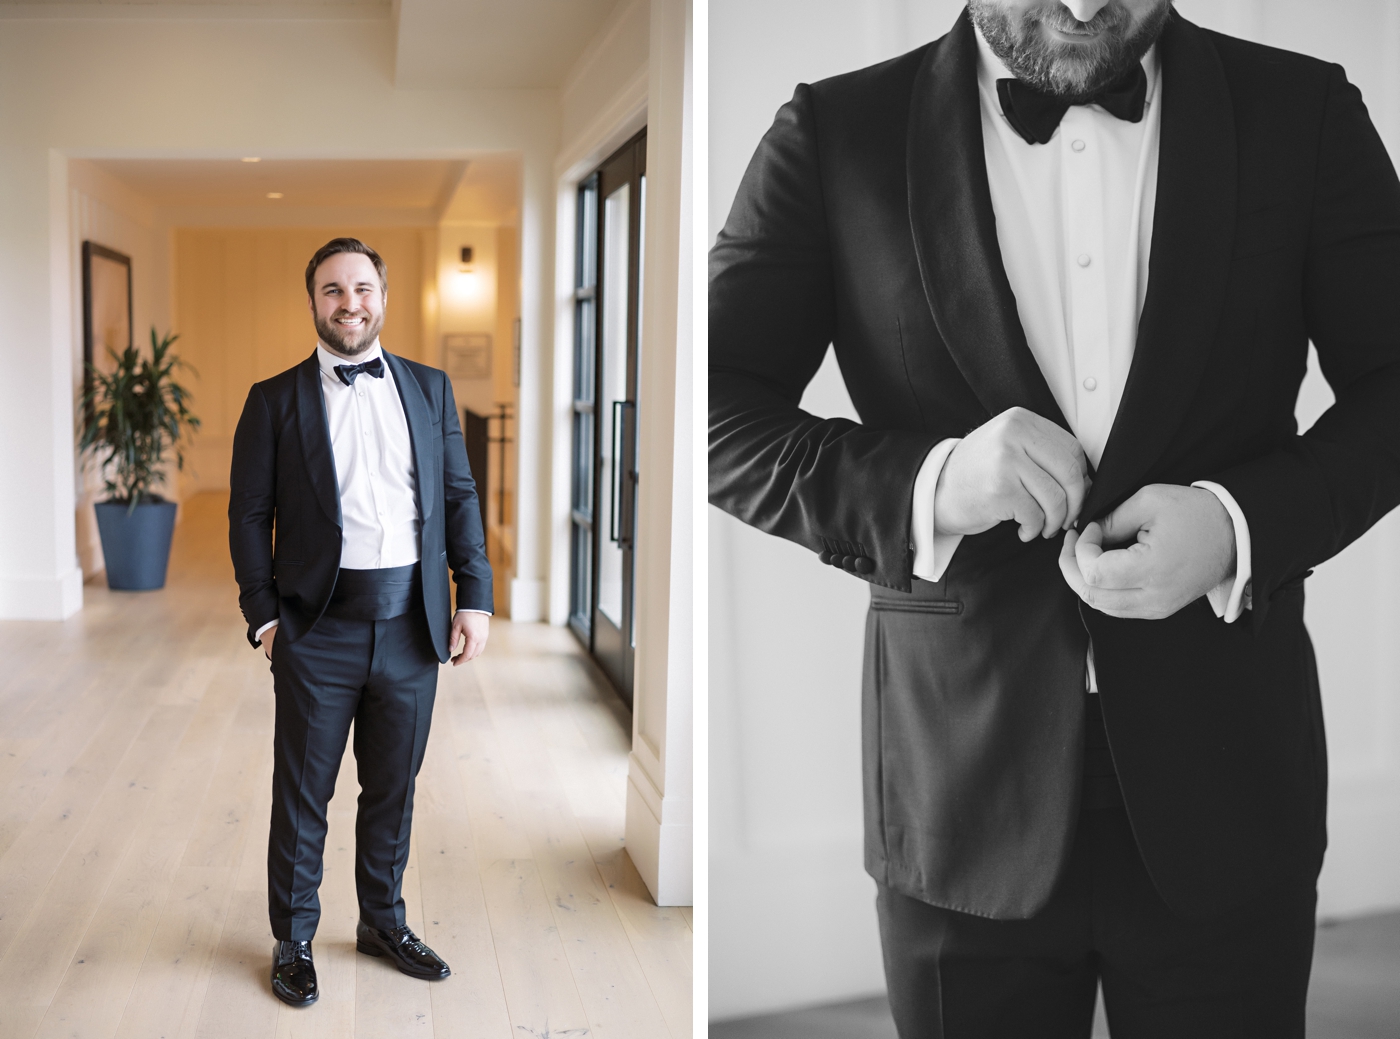 Groom in a classic black tuxedo from Suit Supply